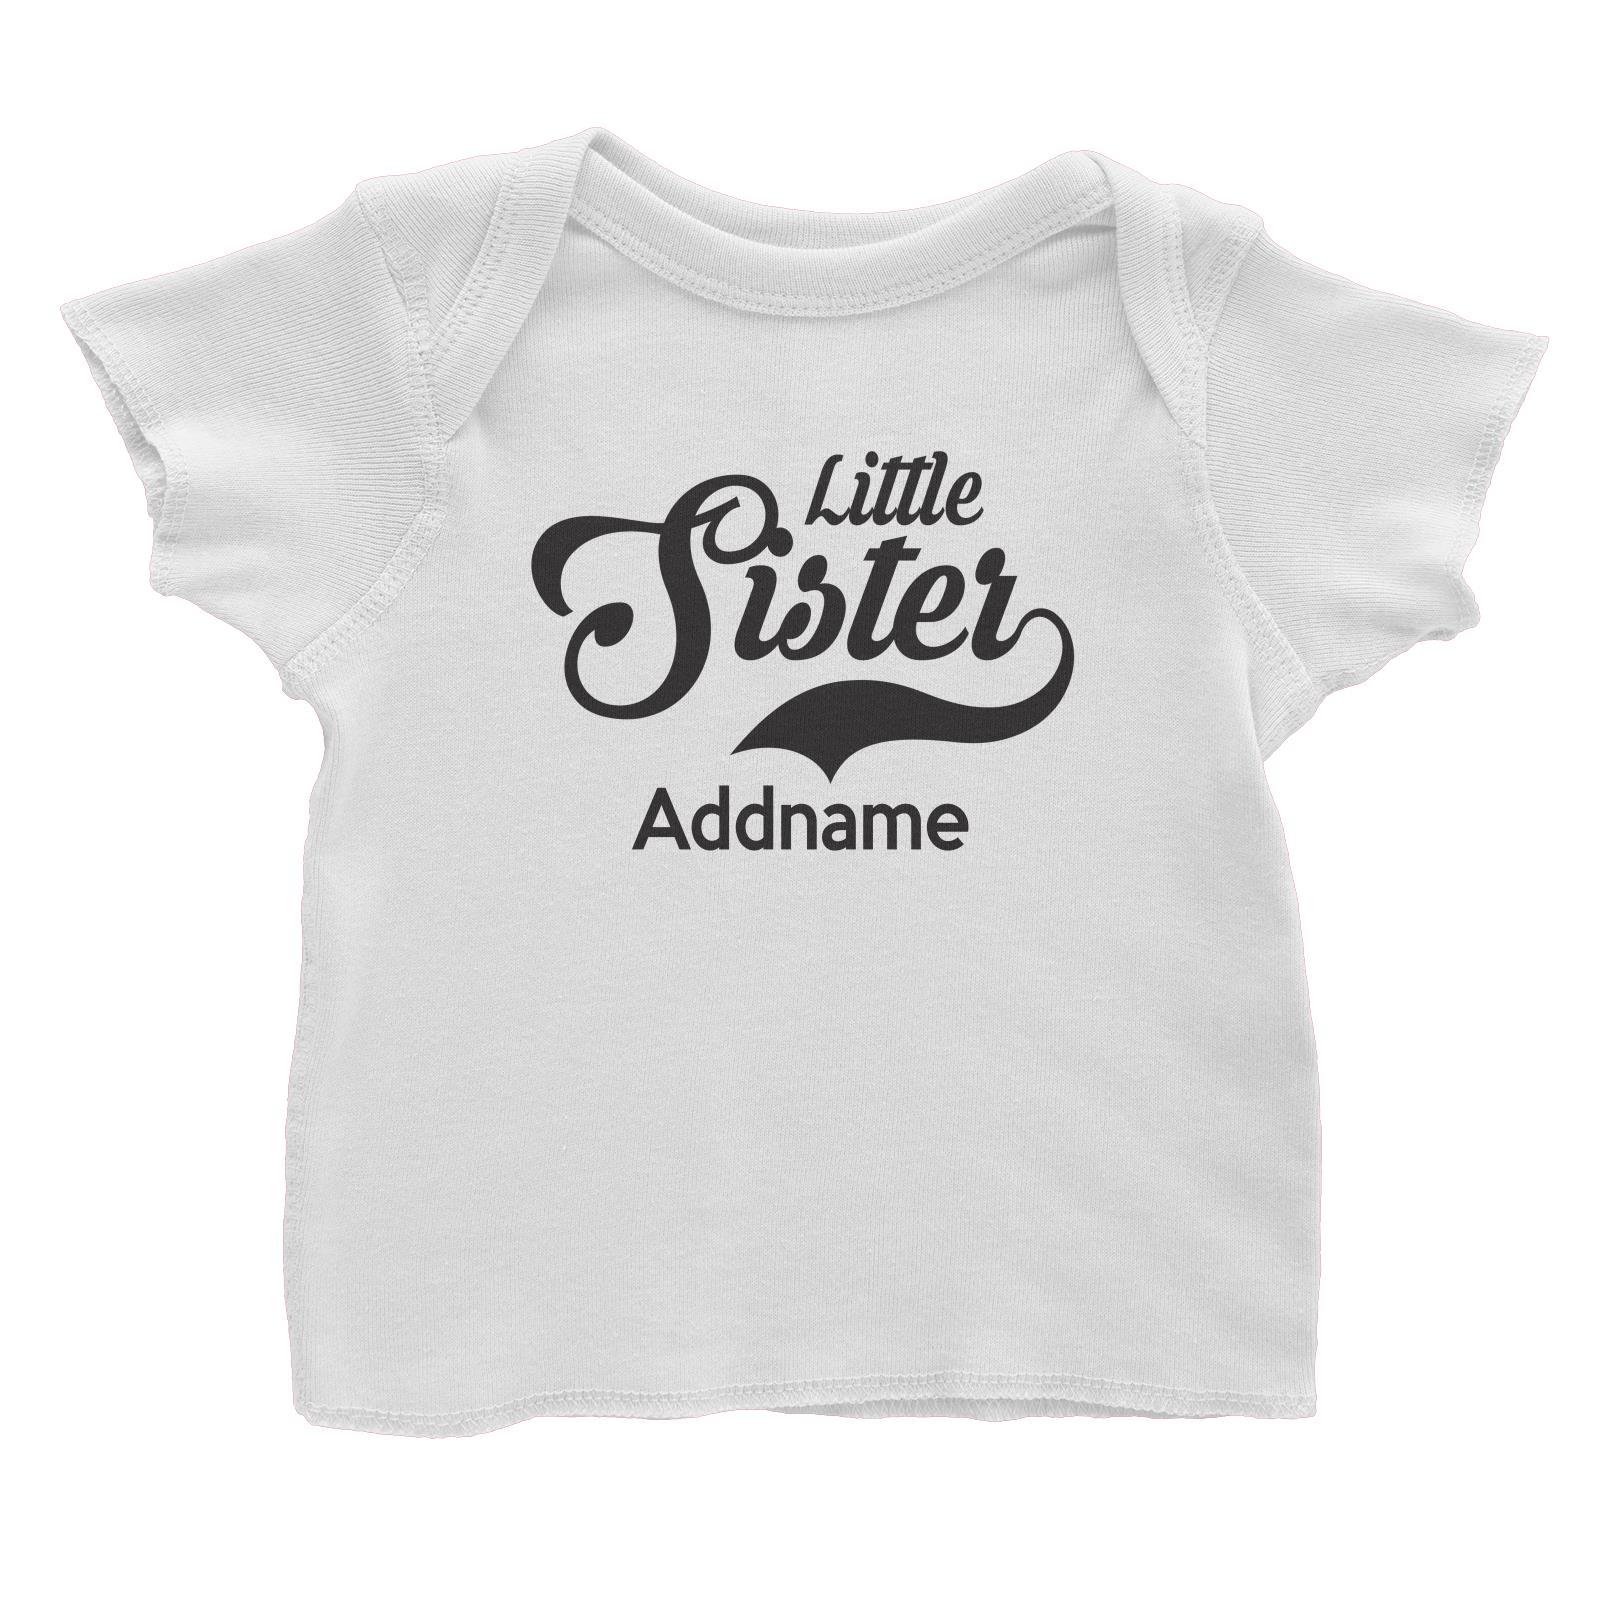 Retro Little Sister Addname Baby T-Shirt  Matching Family Personalizable Designs